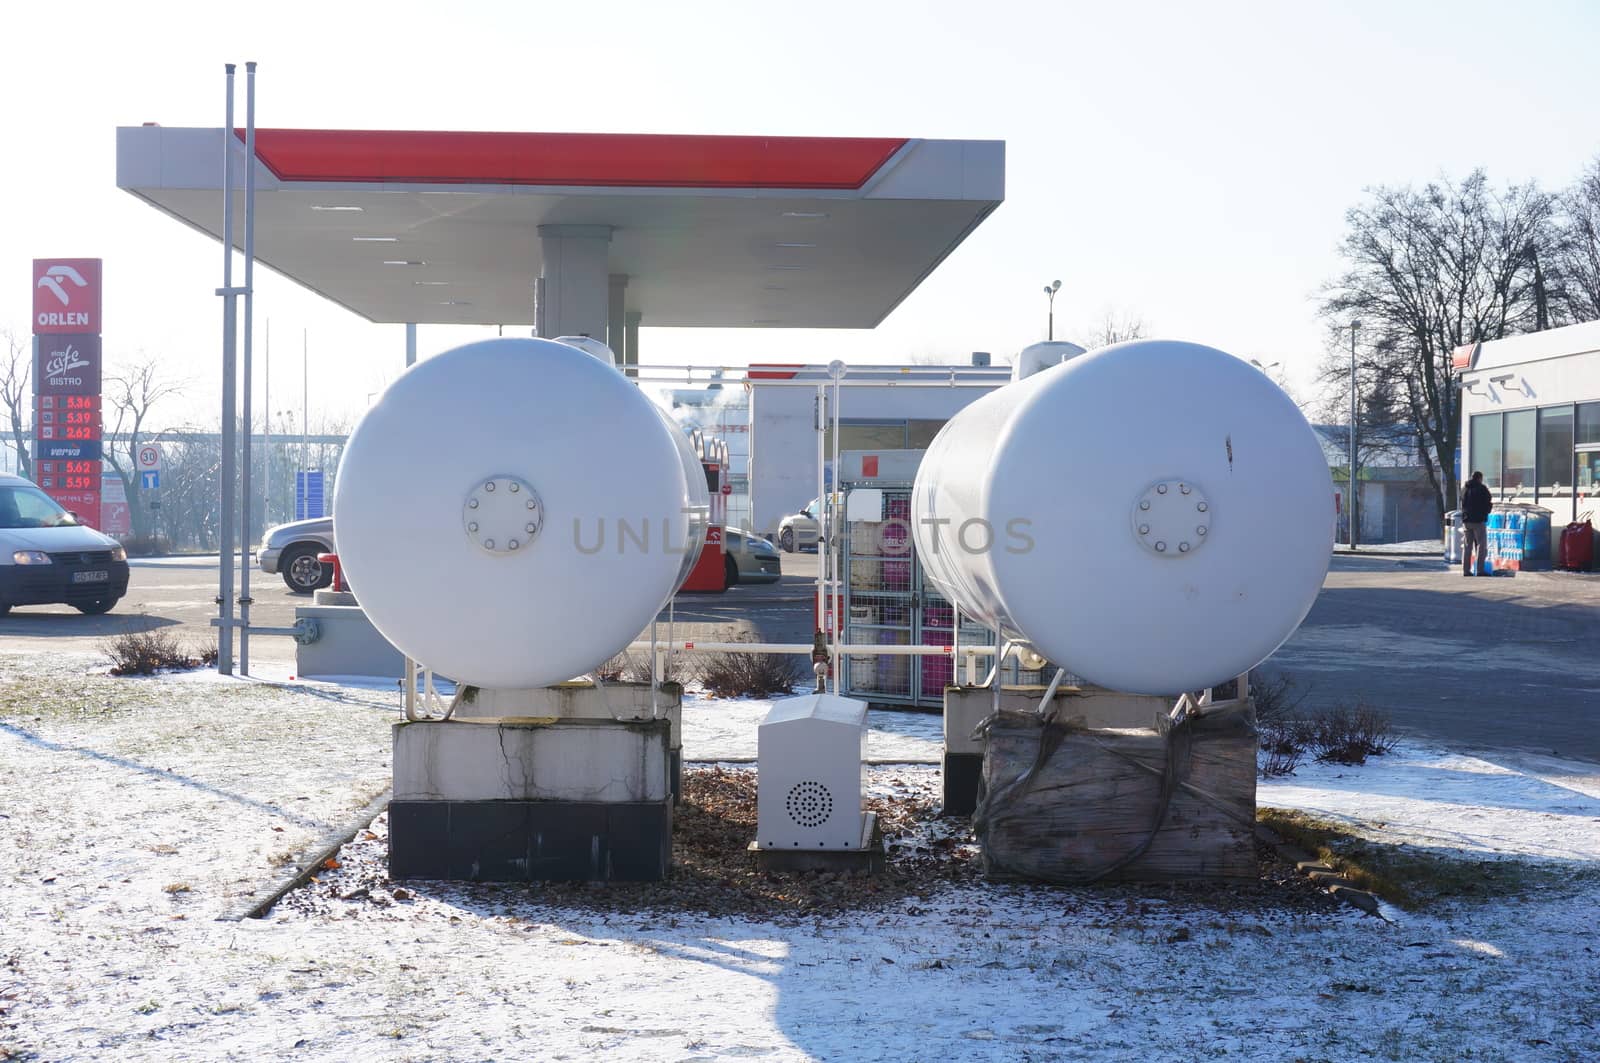 POZNAN, POLAND - JANUARY 25, 2014: Two oil tanks at a Orlen filling station on a cold winter day